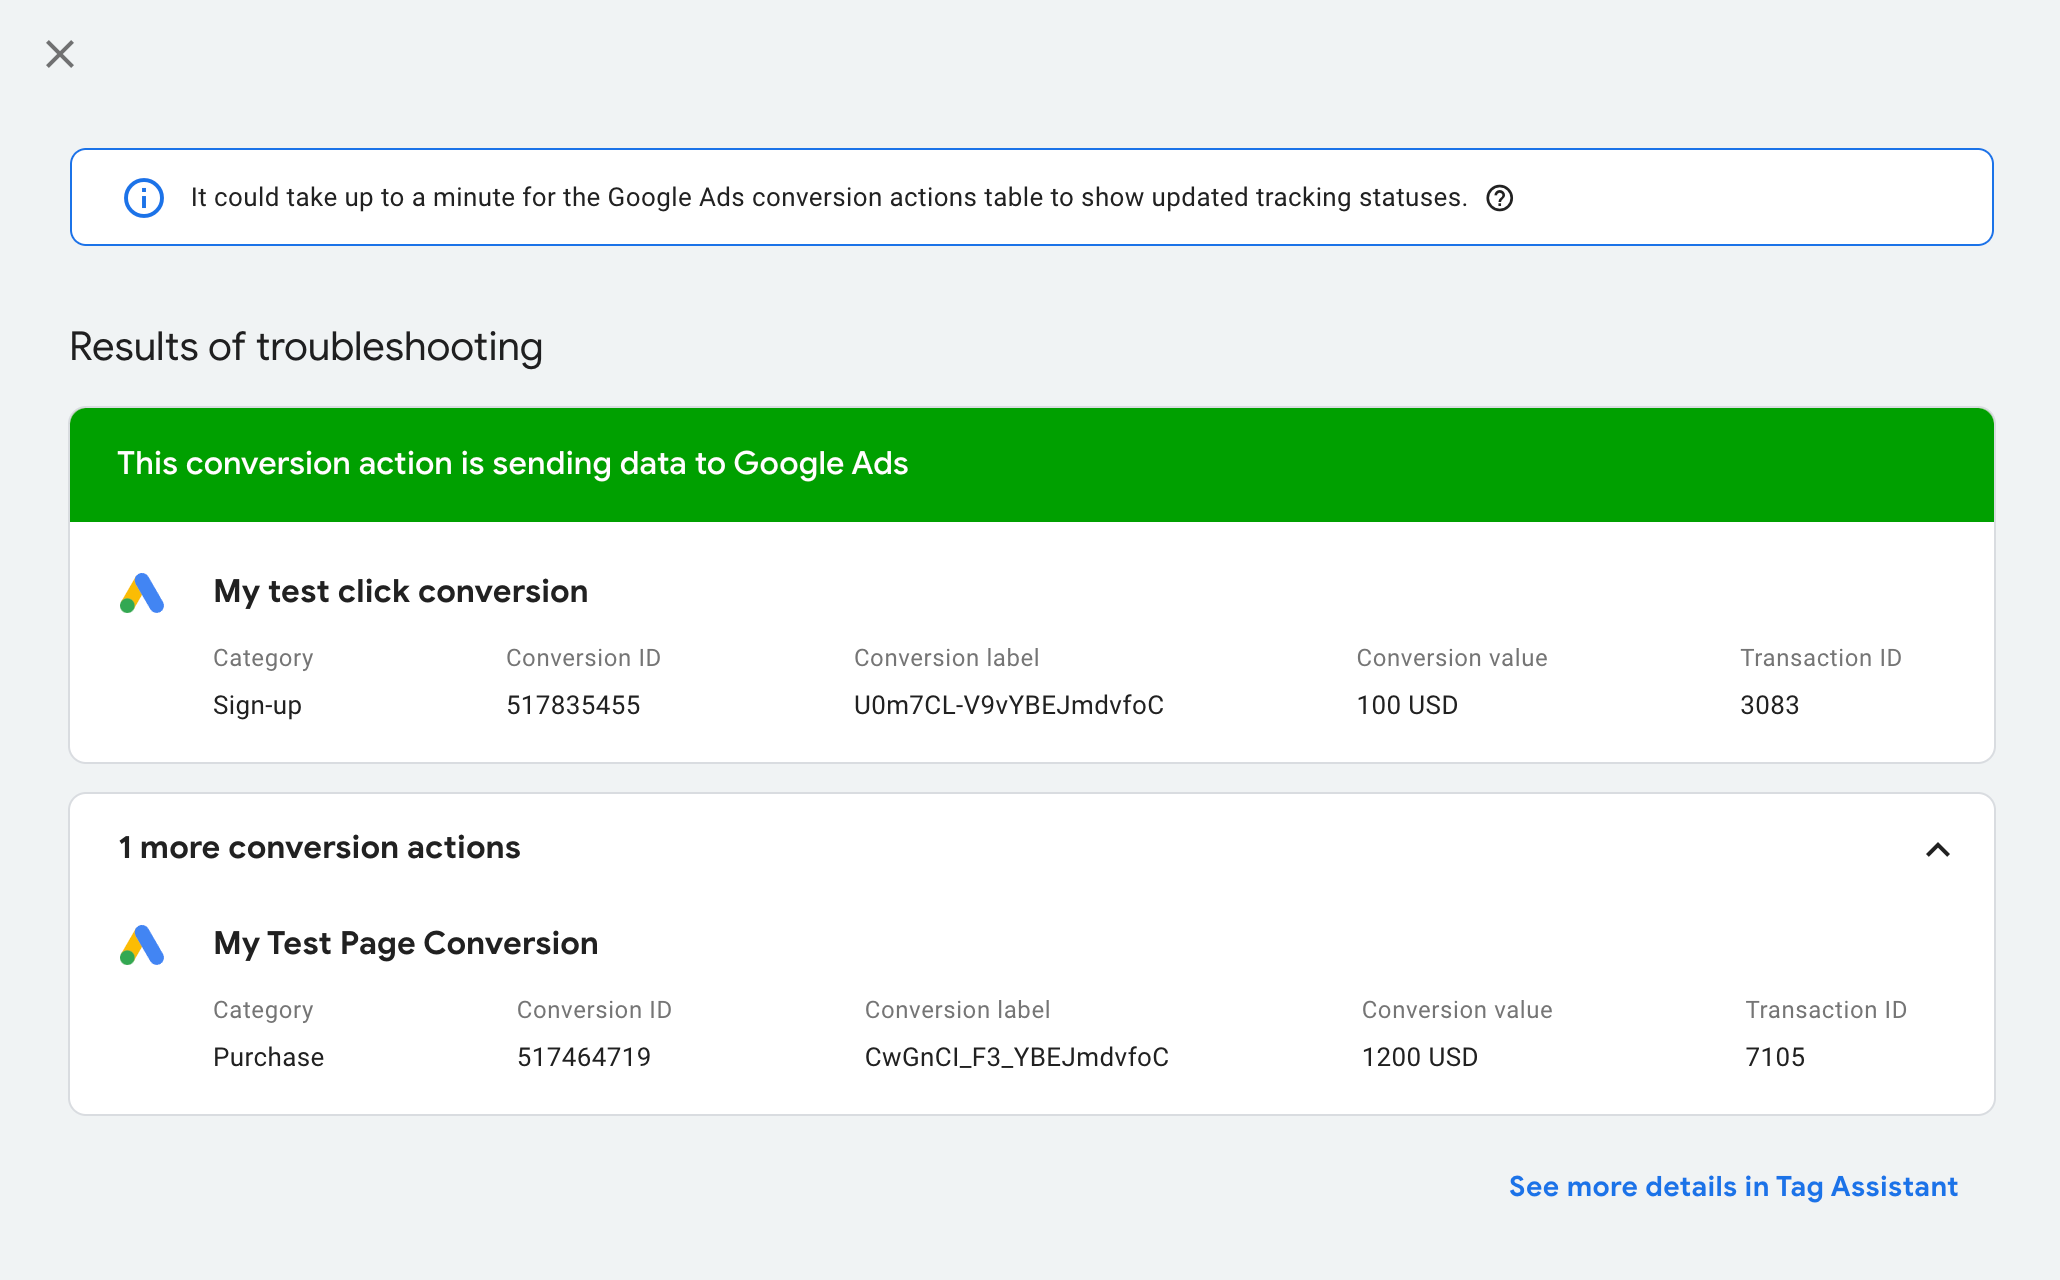 Screenshot of the tag assistant showing "Results of troubleshooting: This conversion action is sending data to Google Ads"